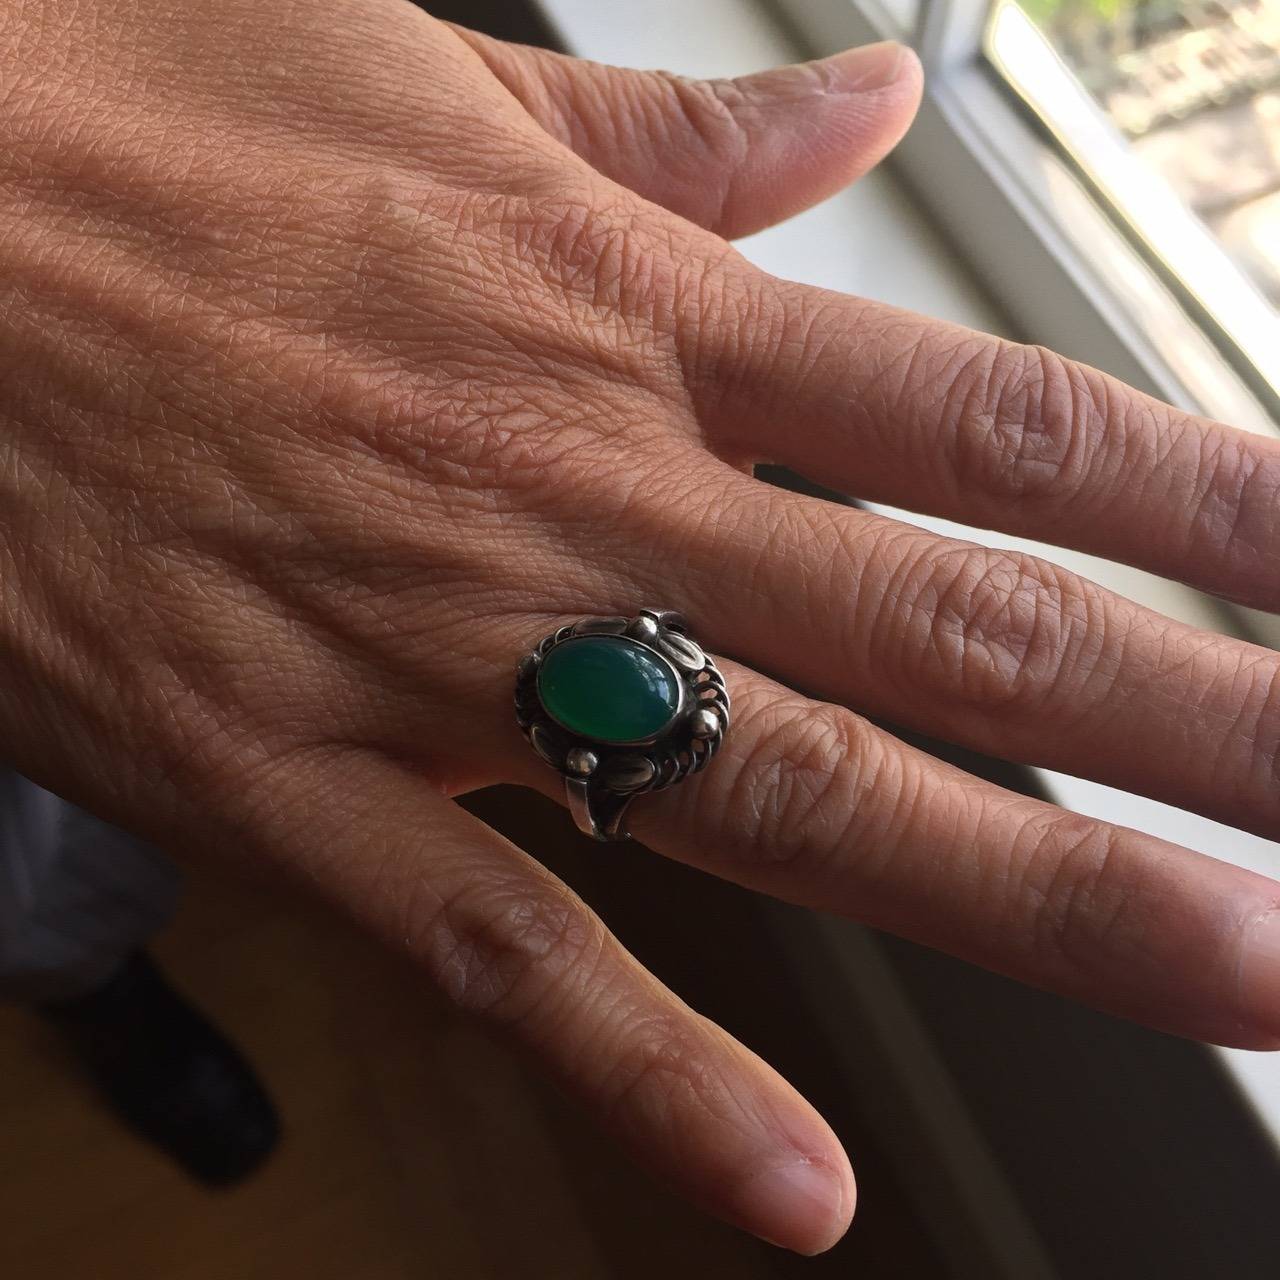 Women's Georg Jensen Sterling Silver Ring No. 1 with Chrysoprase Cabochon